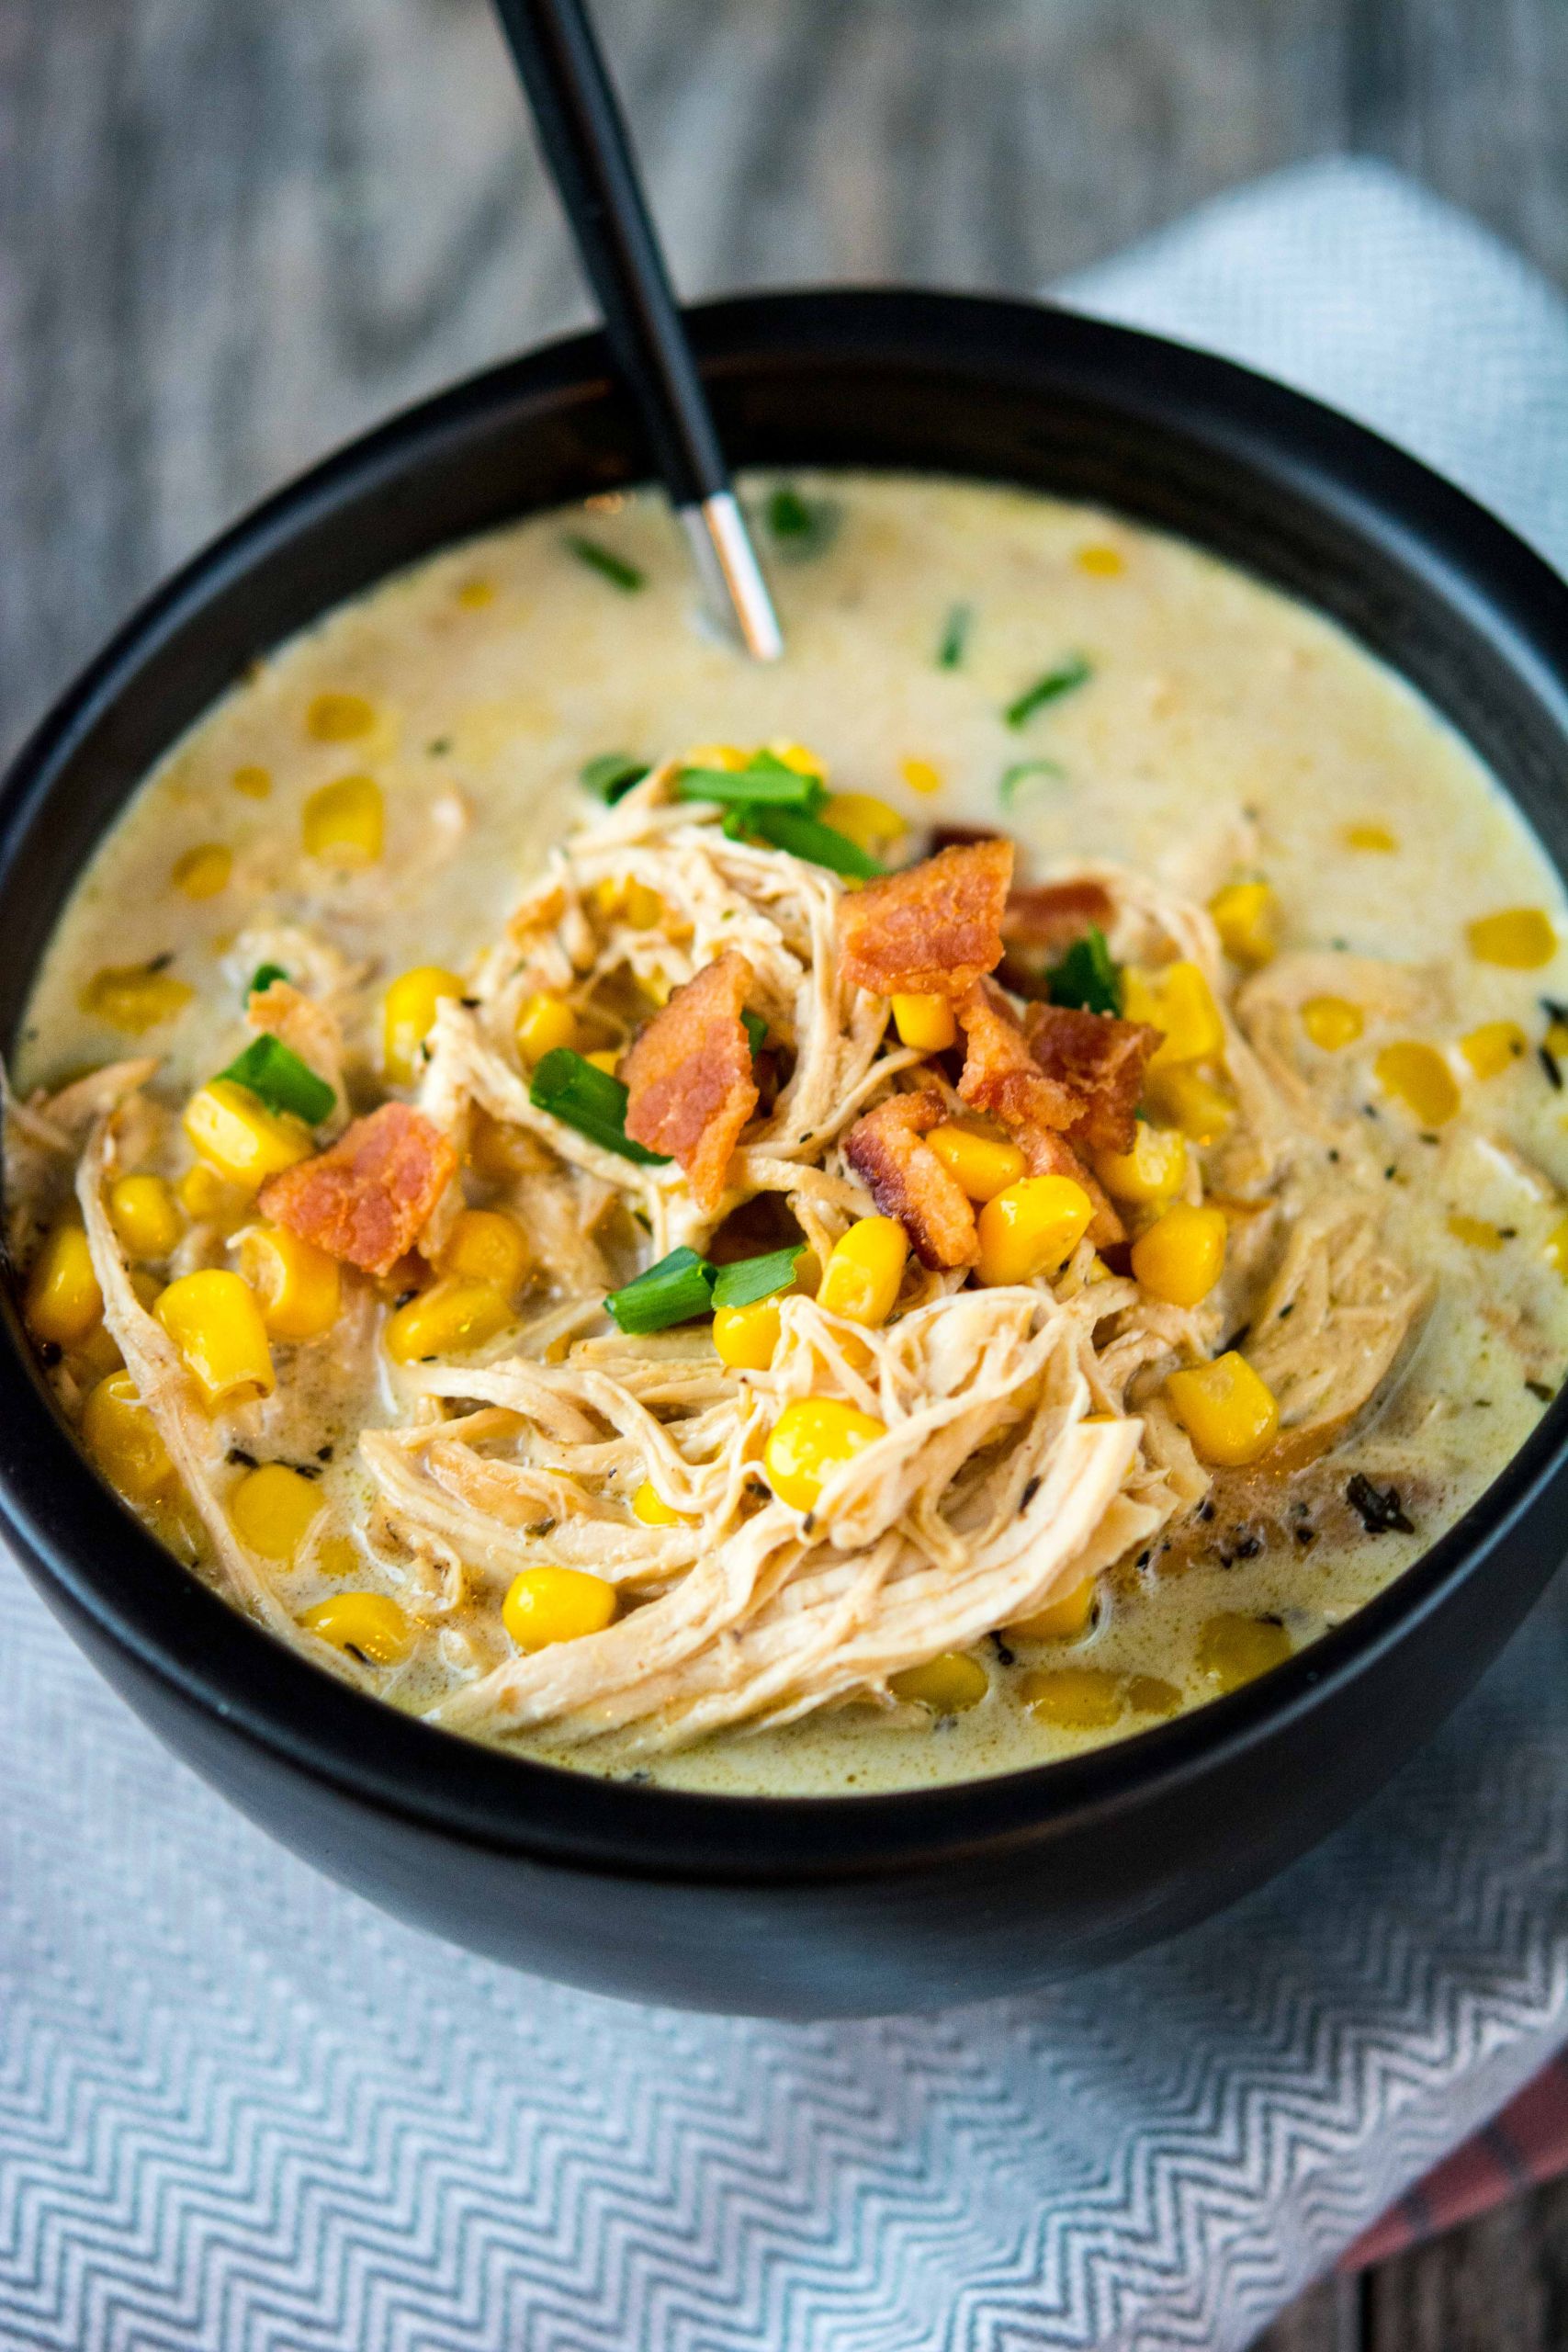 Corn Chowder Recipe Slow Cooker
 Slow Cooker Chicken and Corn Chowder Slow Cooker Gourmet